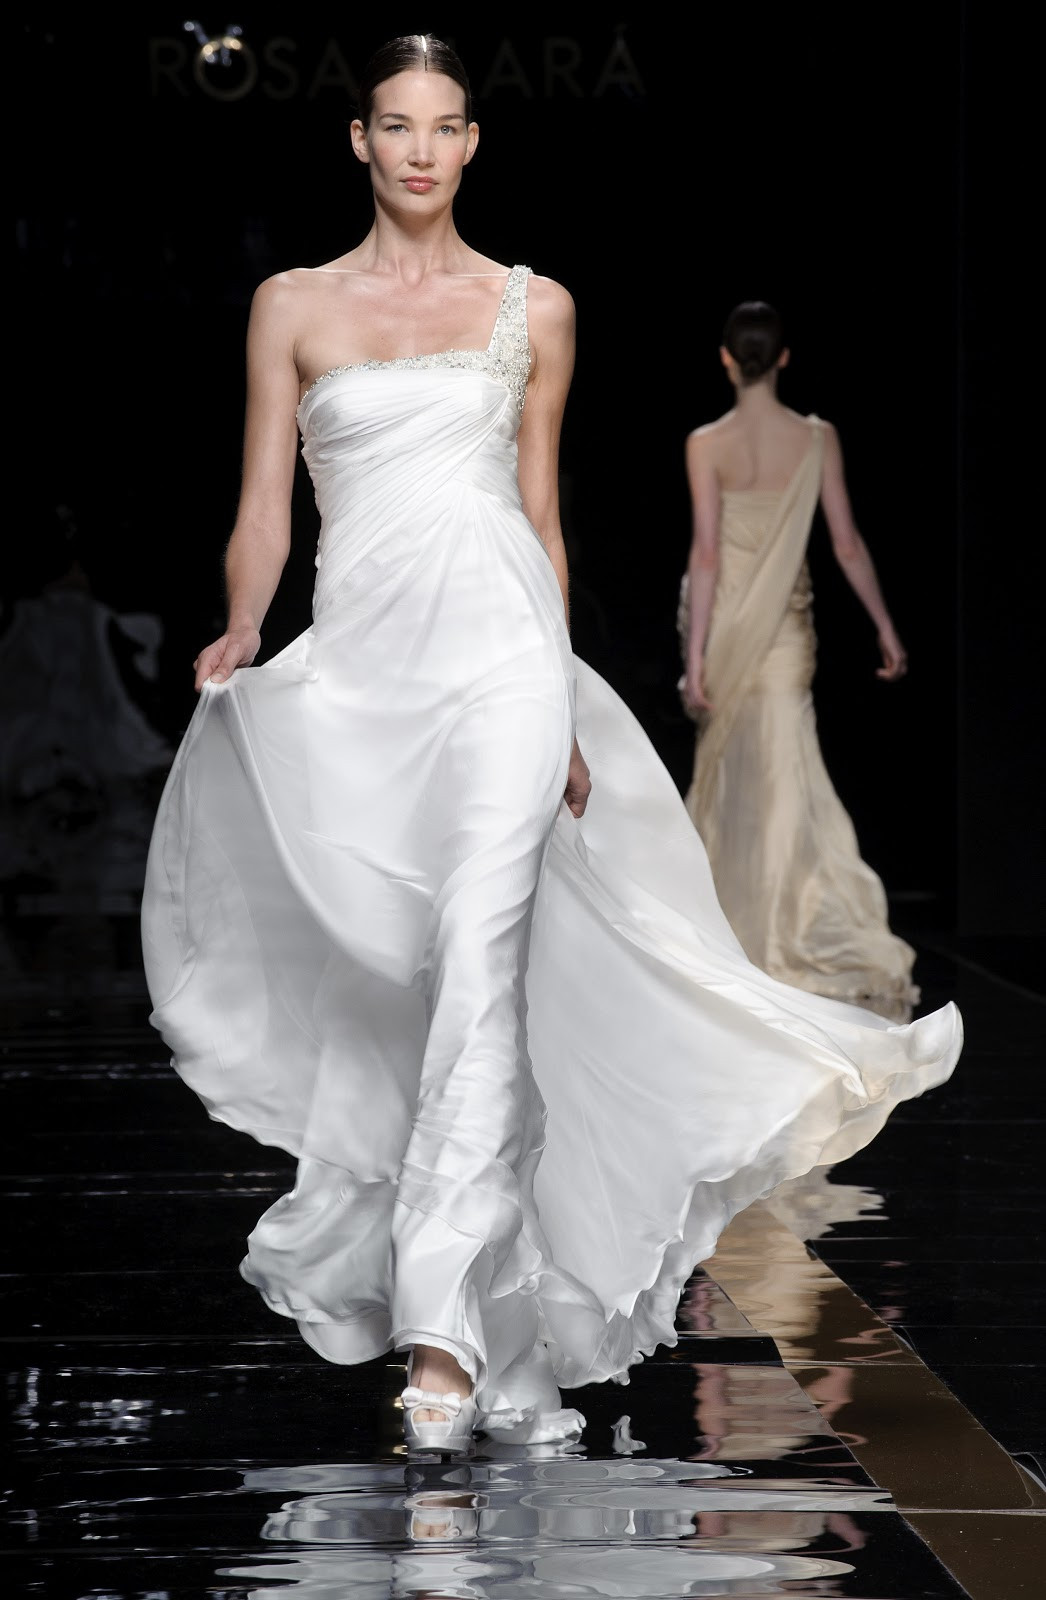 Wedding Dresses In Atlanta
 The Wedding is Over How to Sell Your Wedding Dress on